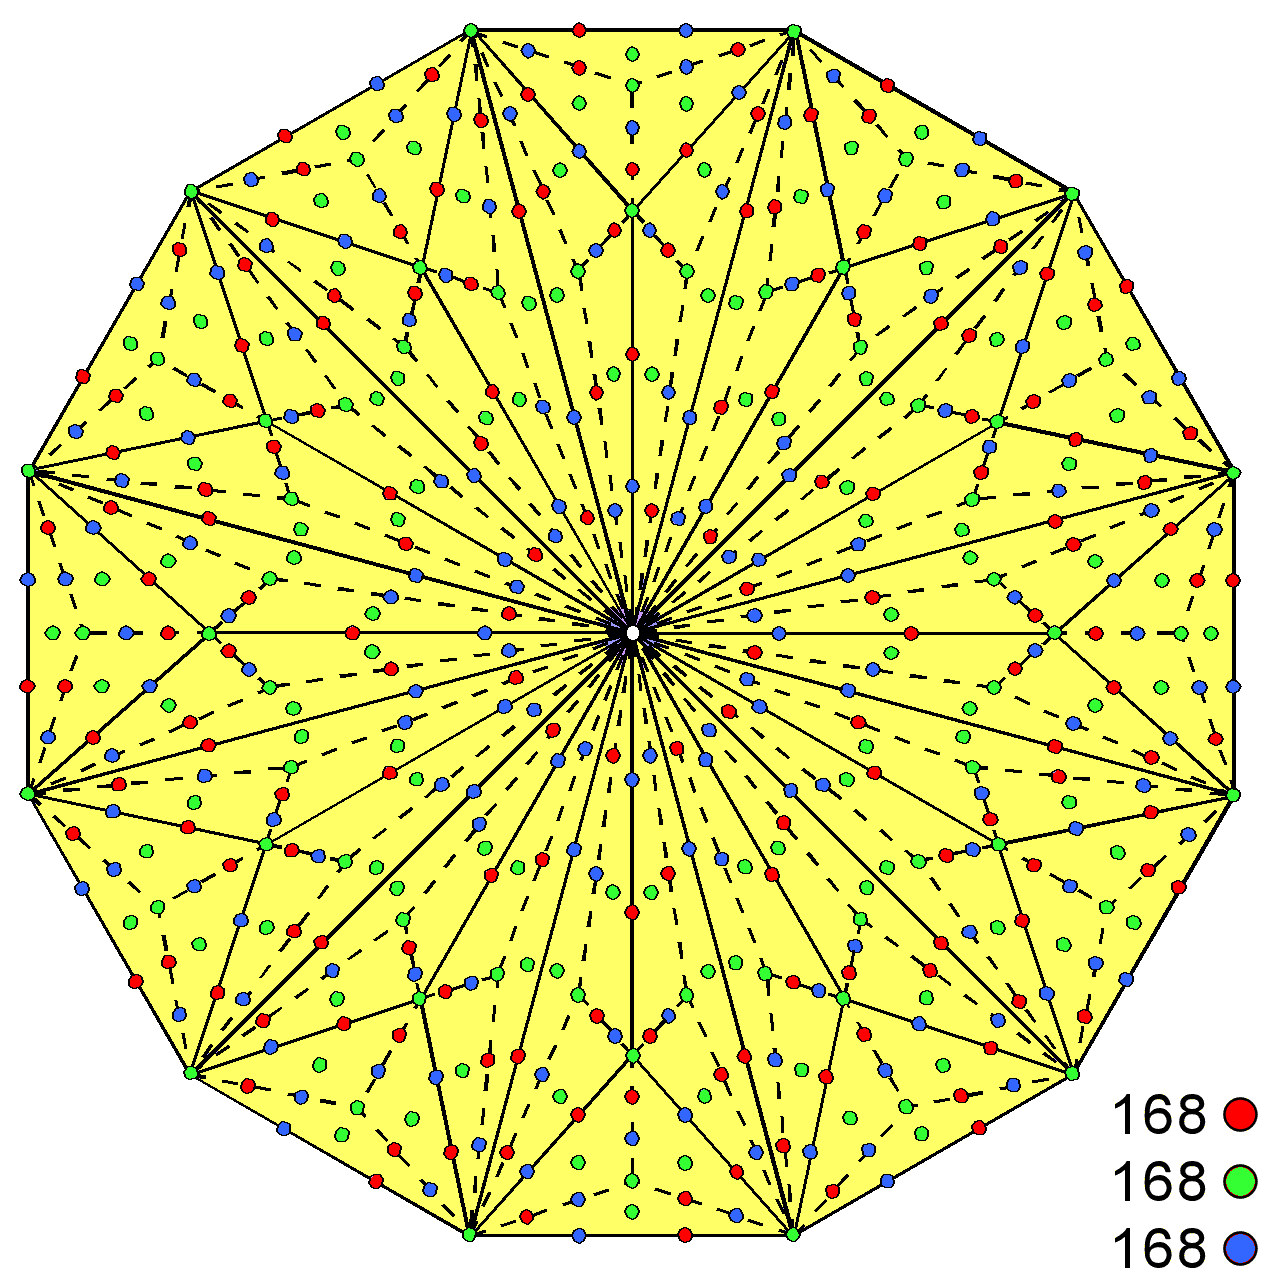 3x168 yods in Type C dodecagon